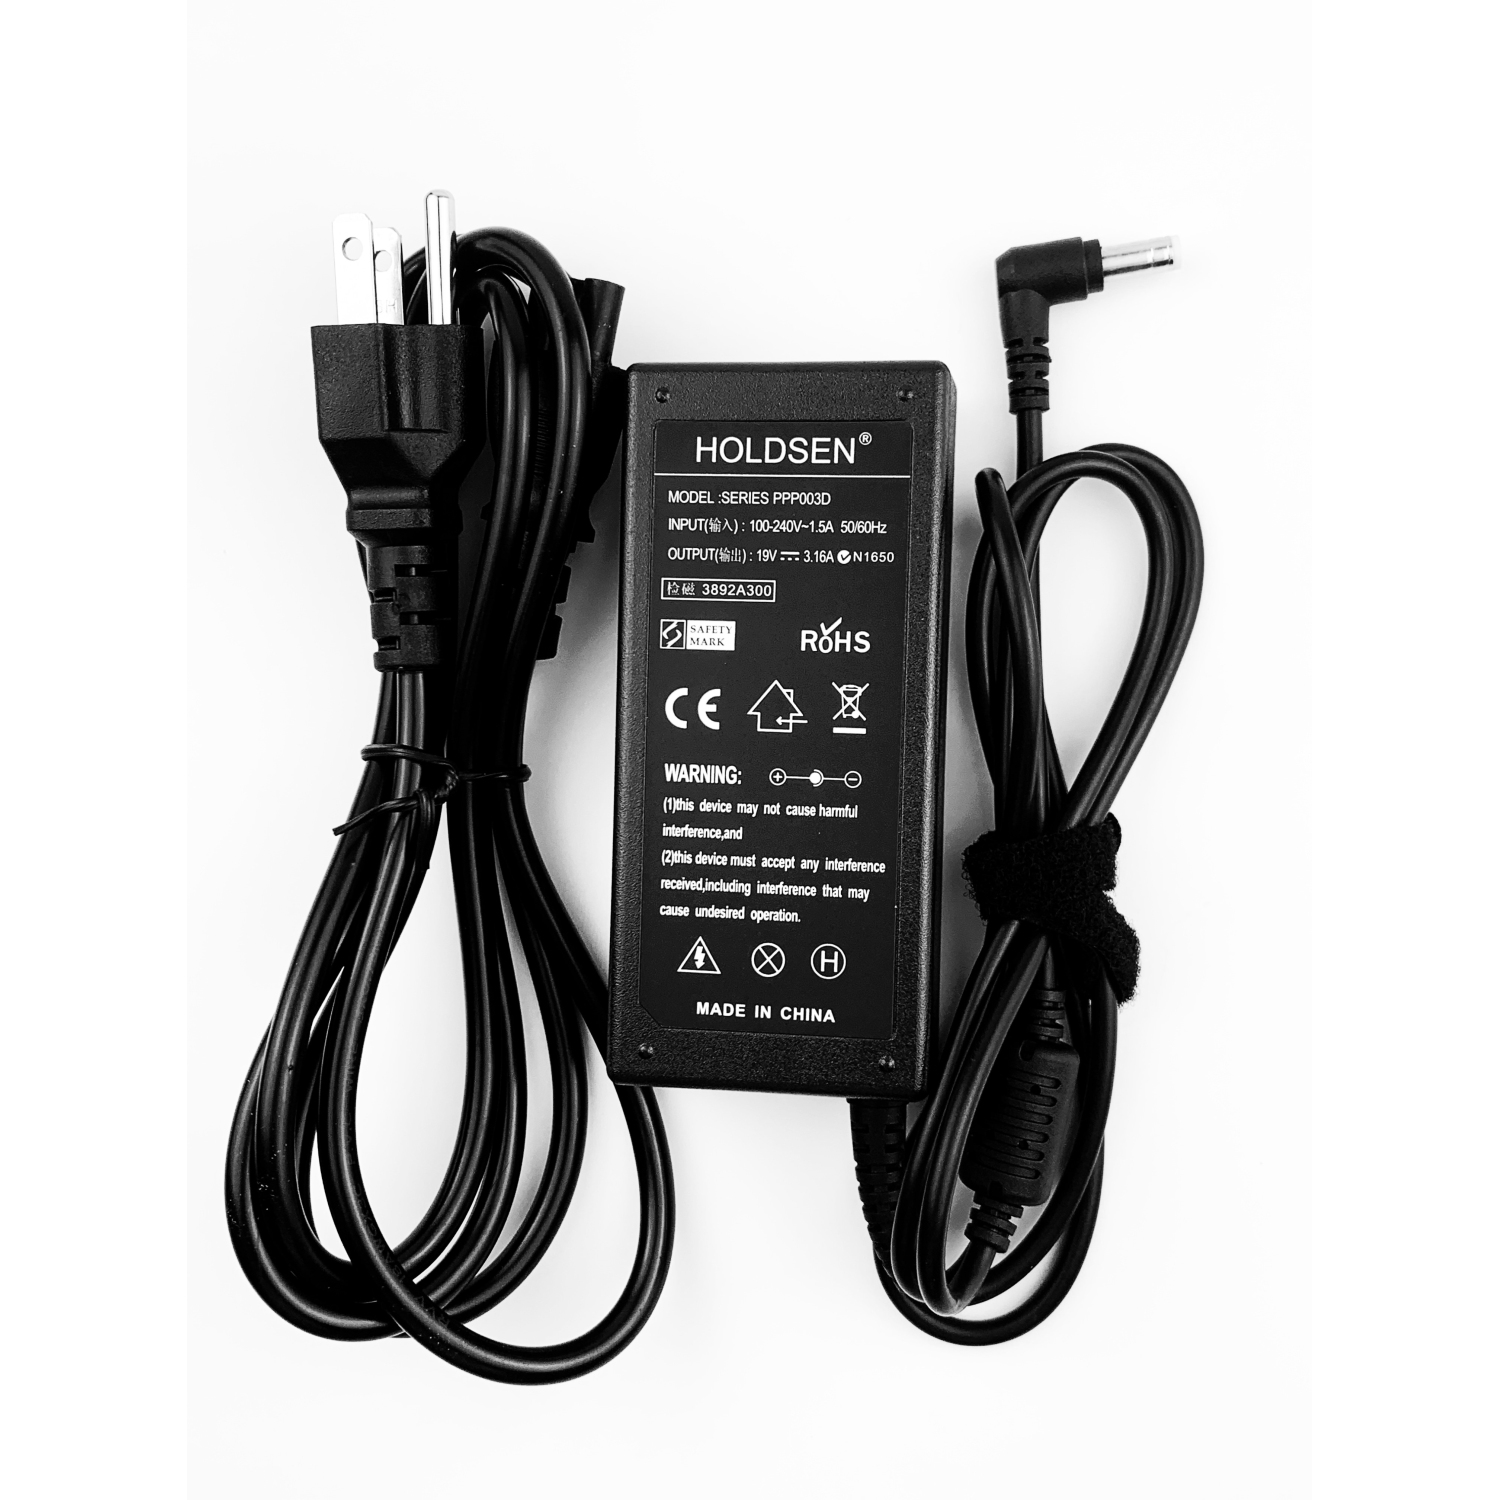 19V 2.37A 3.16A 60W AC adapter power cord for HP J7Y67AA#ABA Pavilion 24m 25cw LCD monitors ONLY